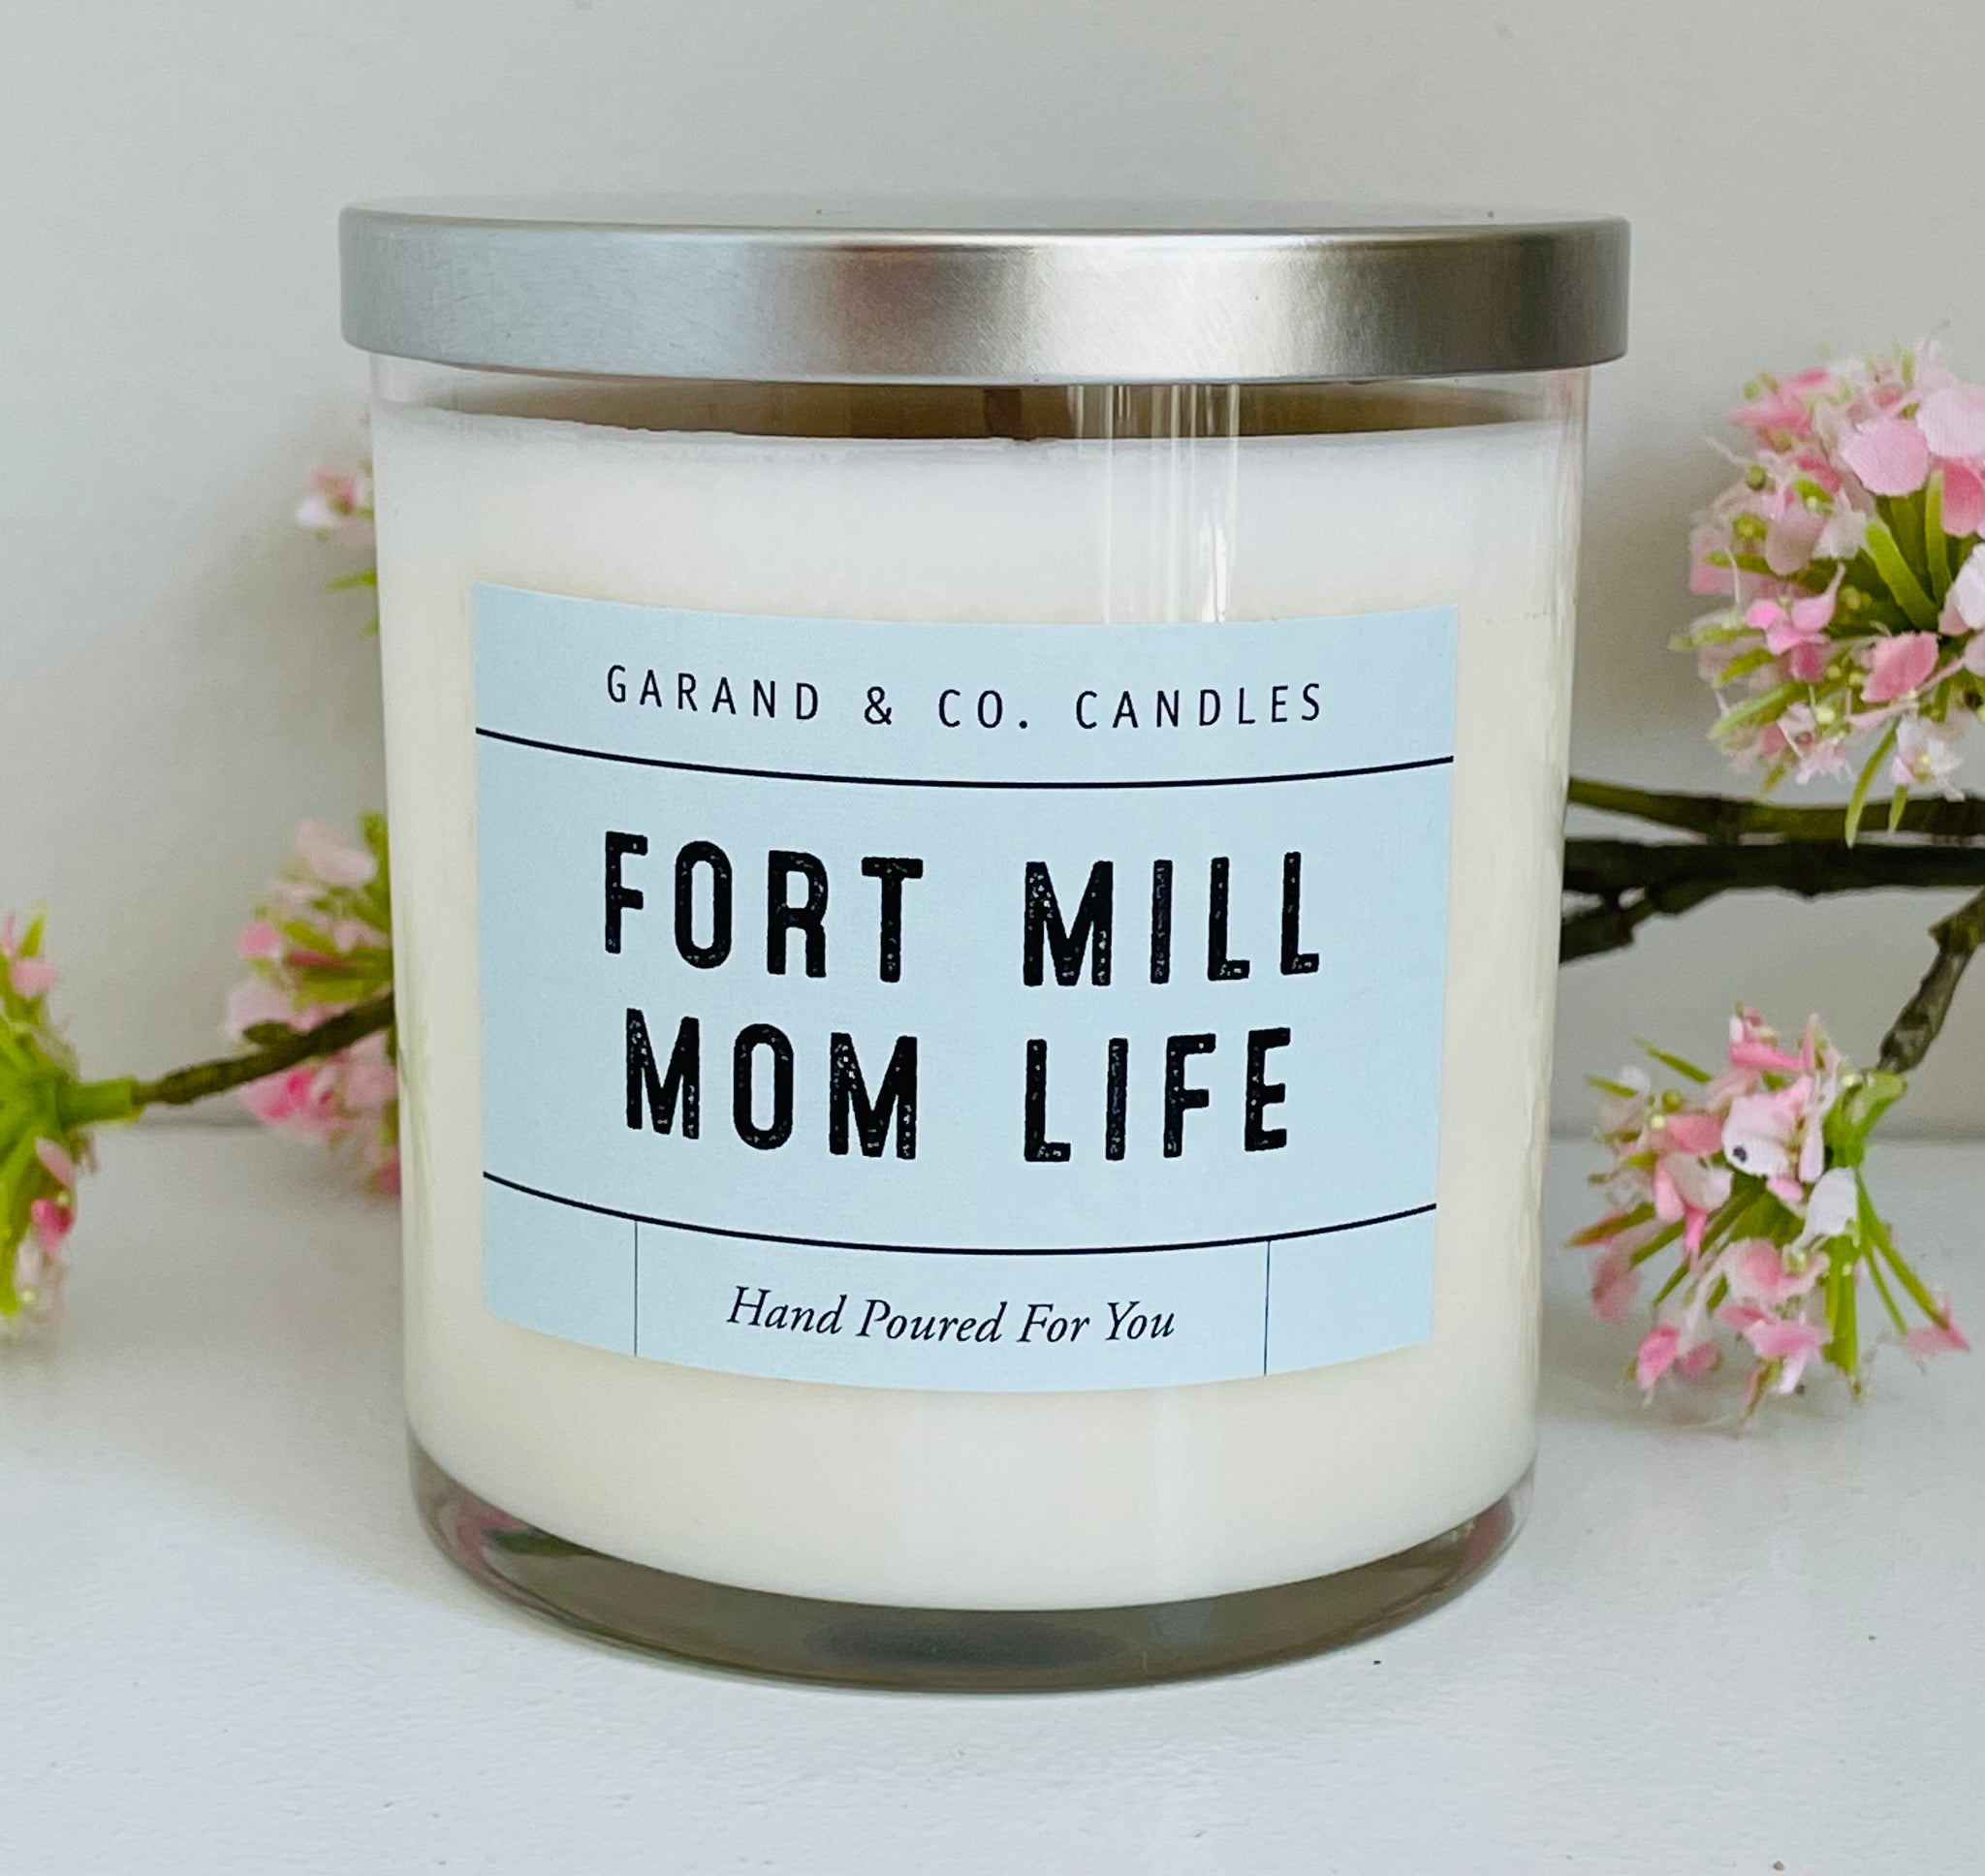 12 oz Clear Glass Jar Candle - Fort Mill Mom Life